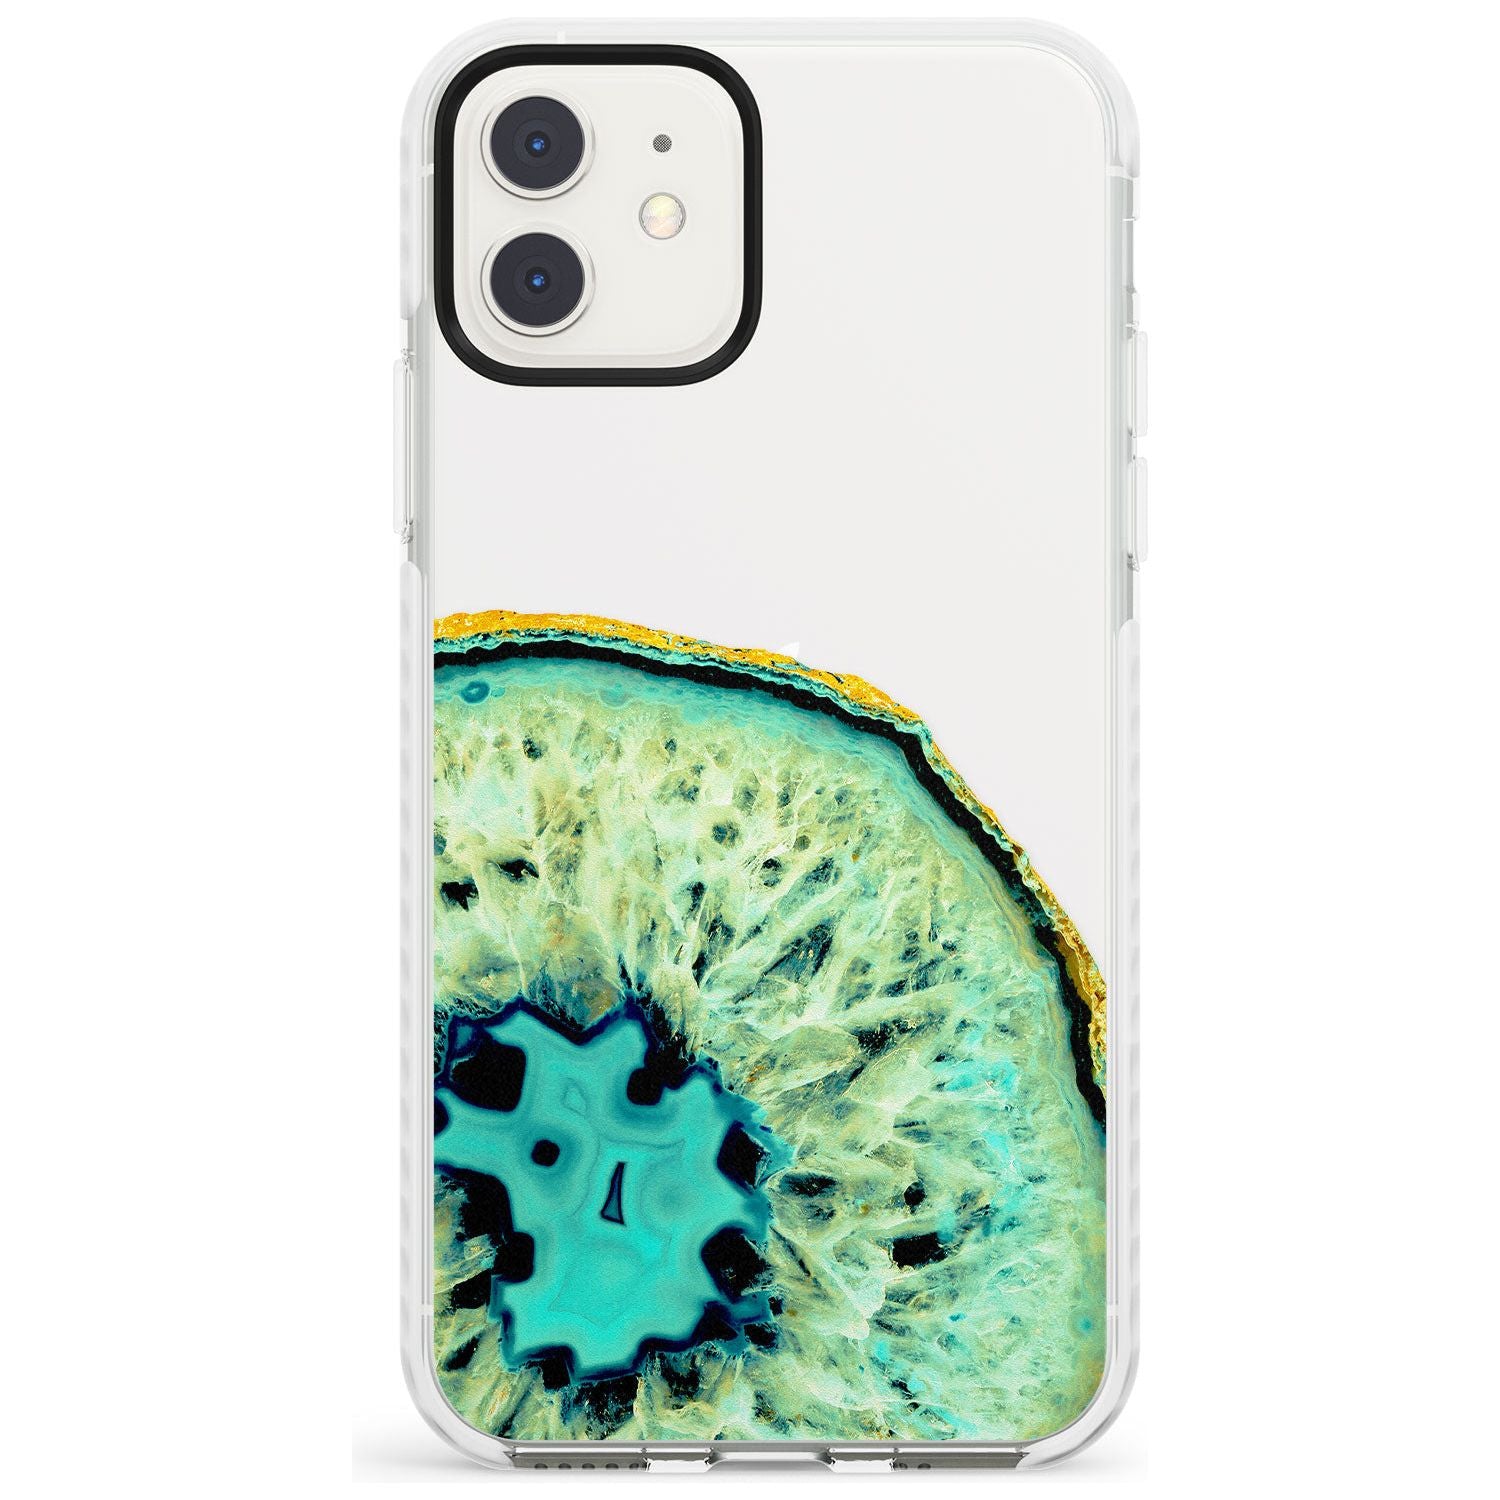 Turquoise & Green Gemstone Crystal Clear Design Impact Phone Case for iPhone 11